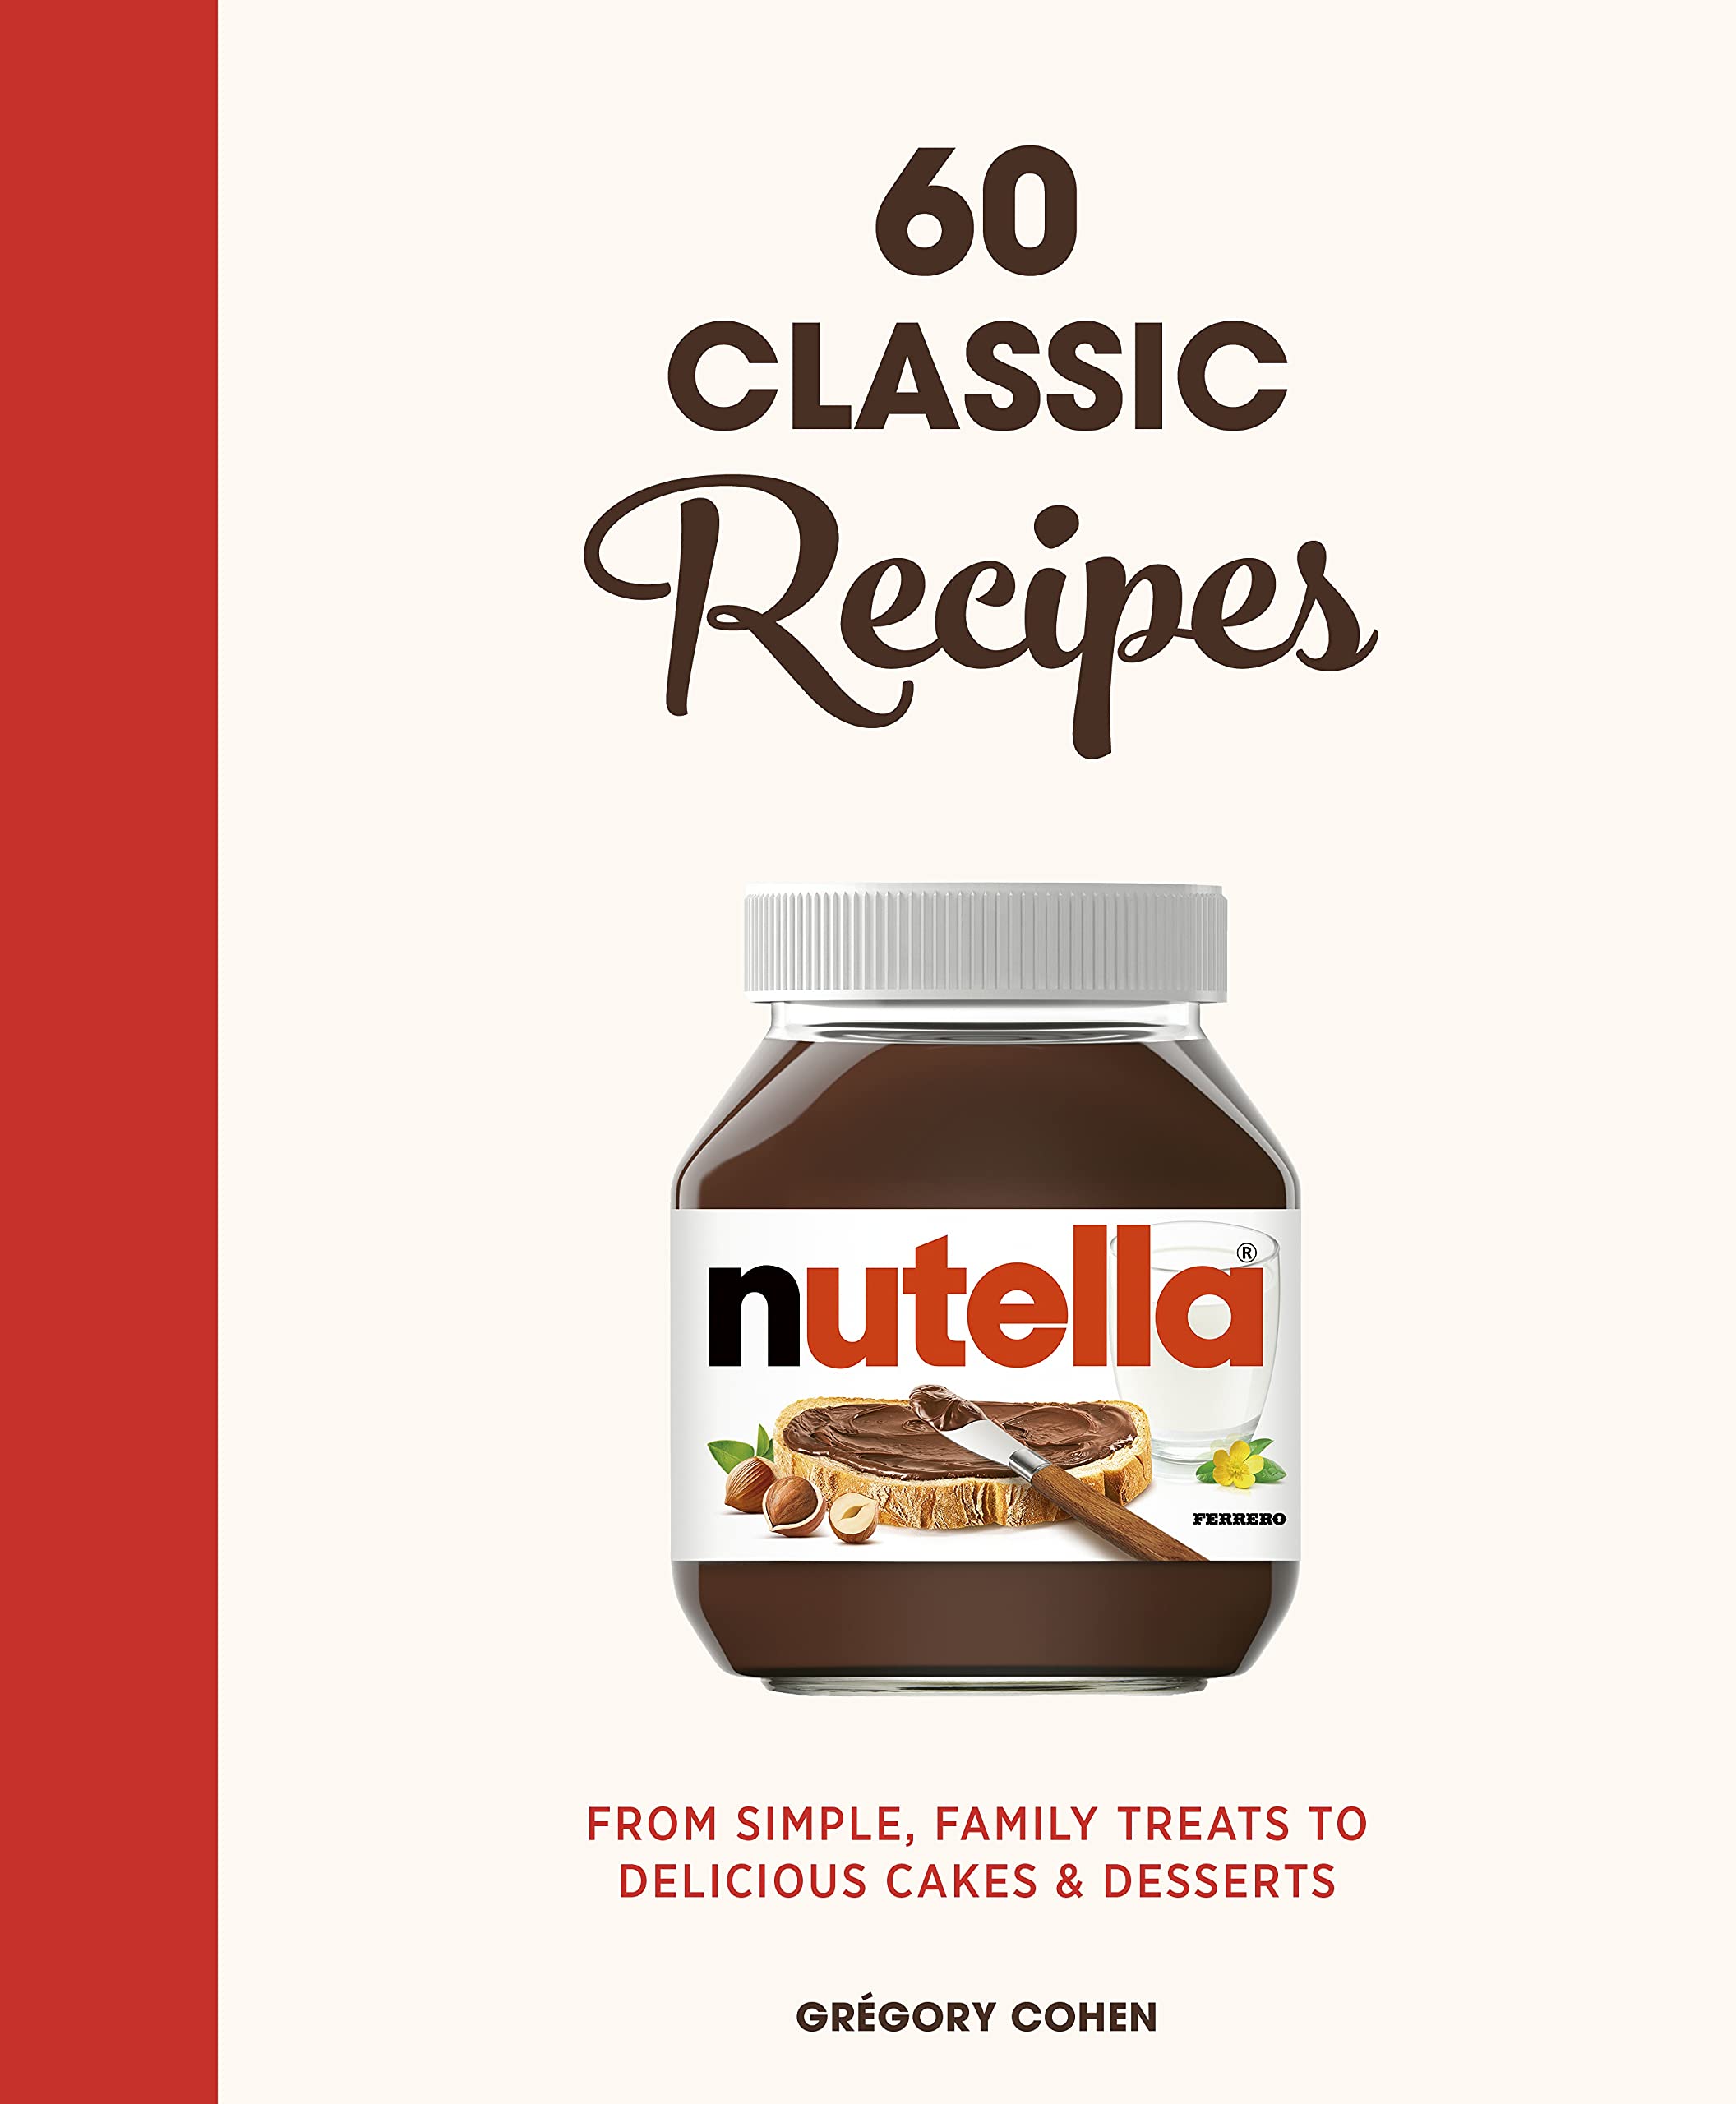 Nutella: 60 Classic Recipes: From simple, family treats to delicious cakes & desserts (Grégory Cohen)